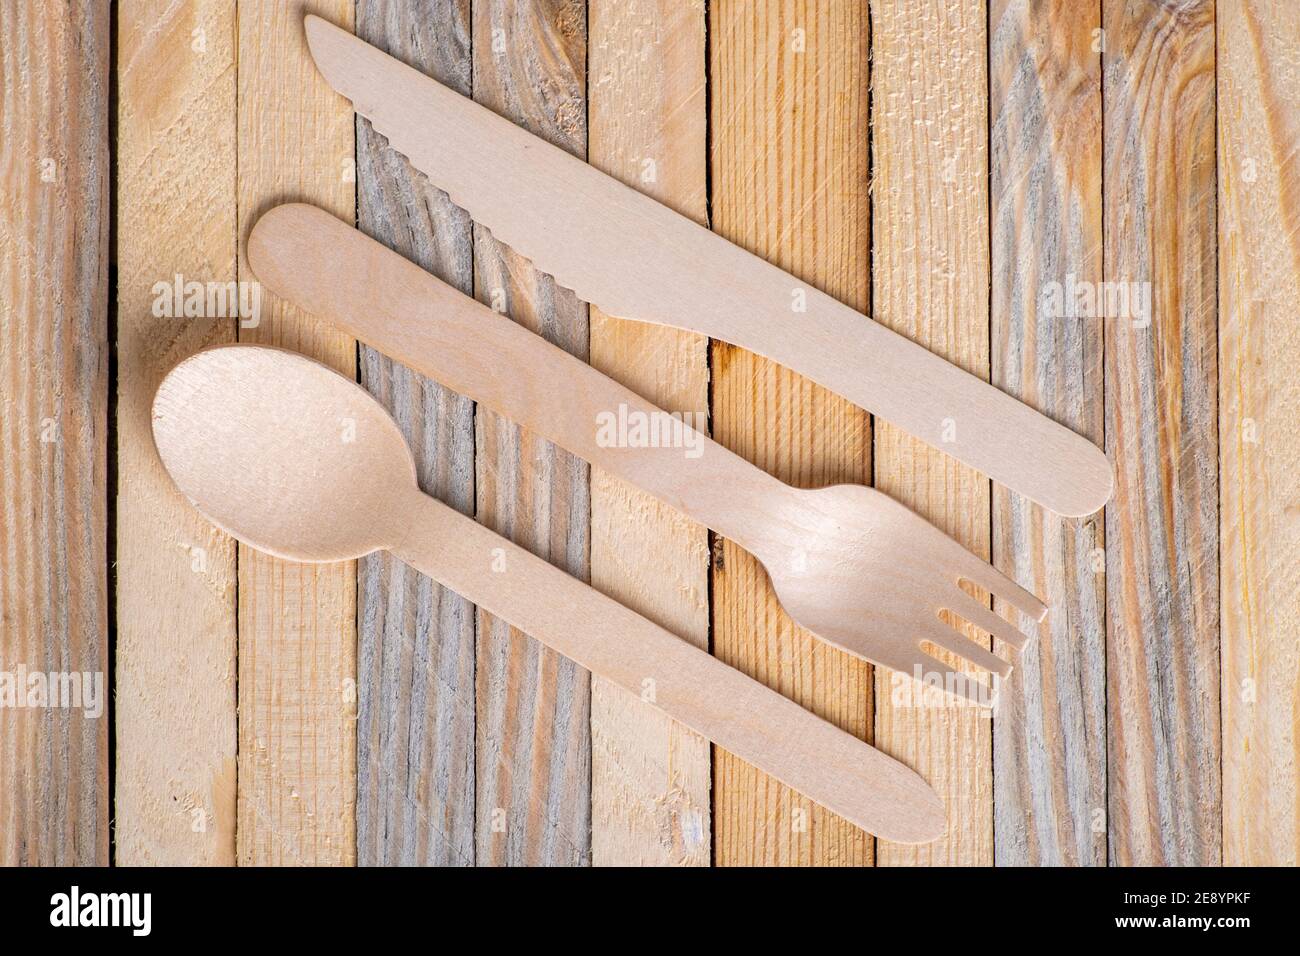 Wooden cutlery stacked on a wooden table. Ecological disposable utensils used at meals. Light background. Stock Photo